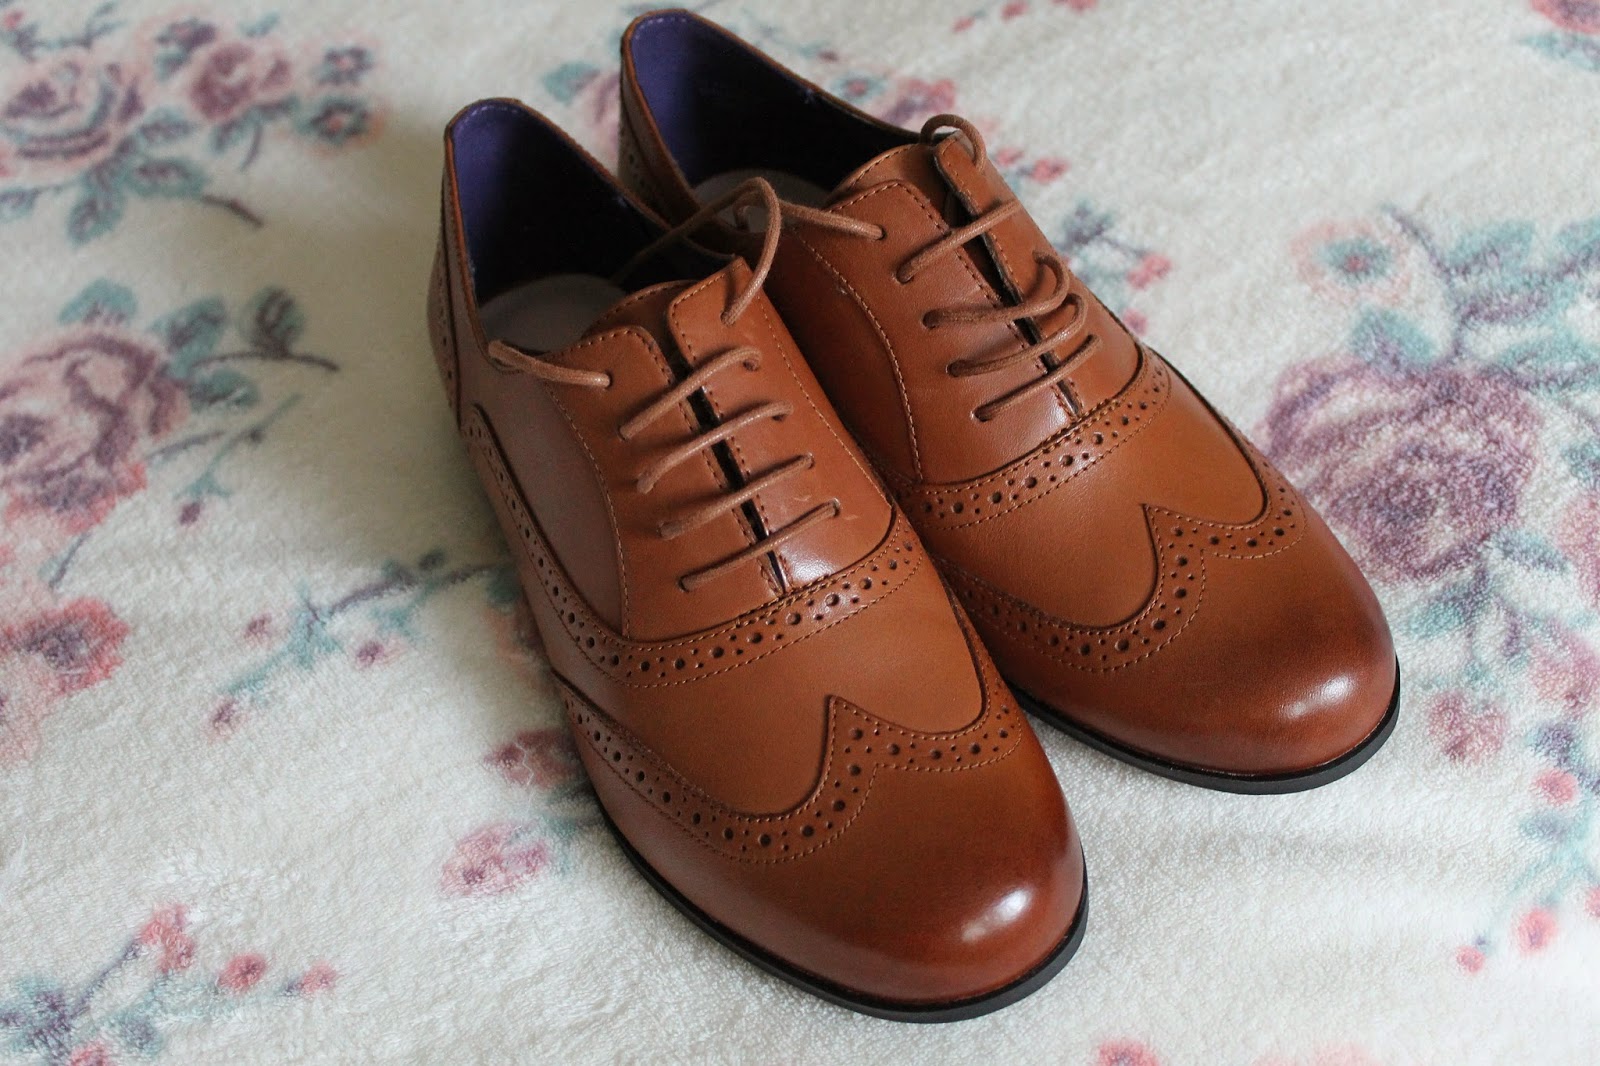 Clarks Brown Leather Brogues